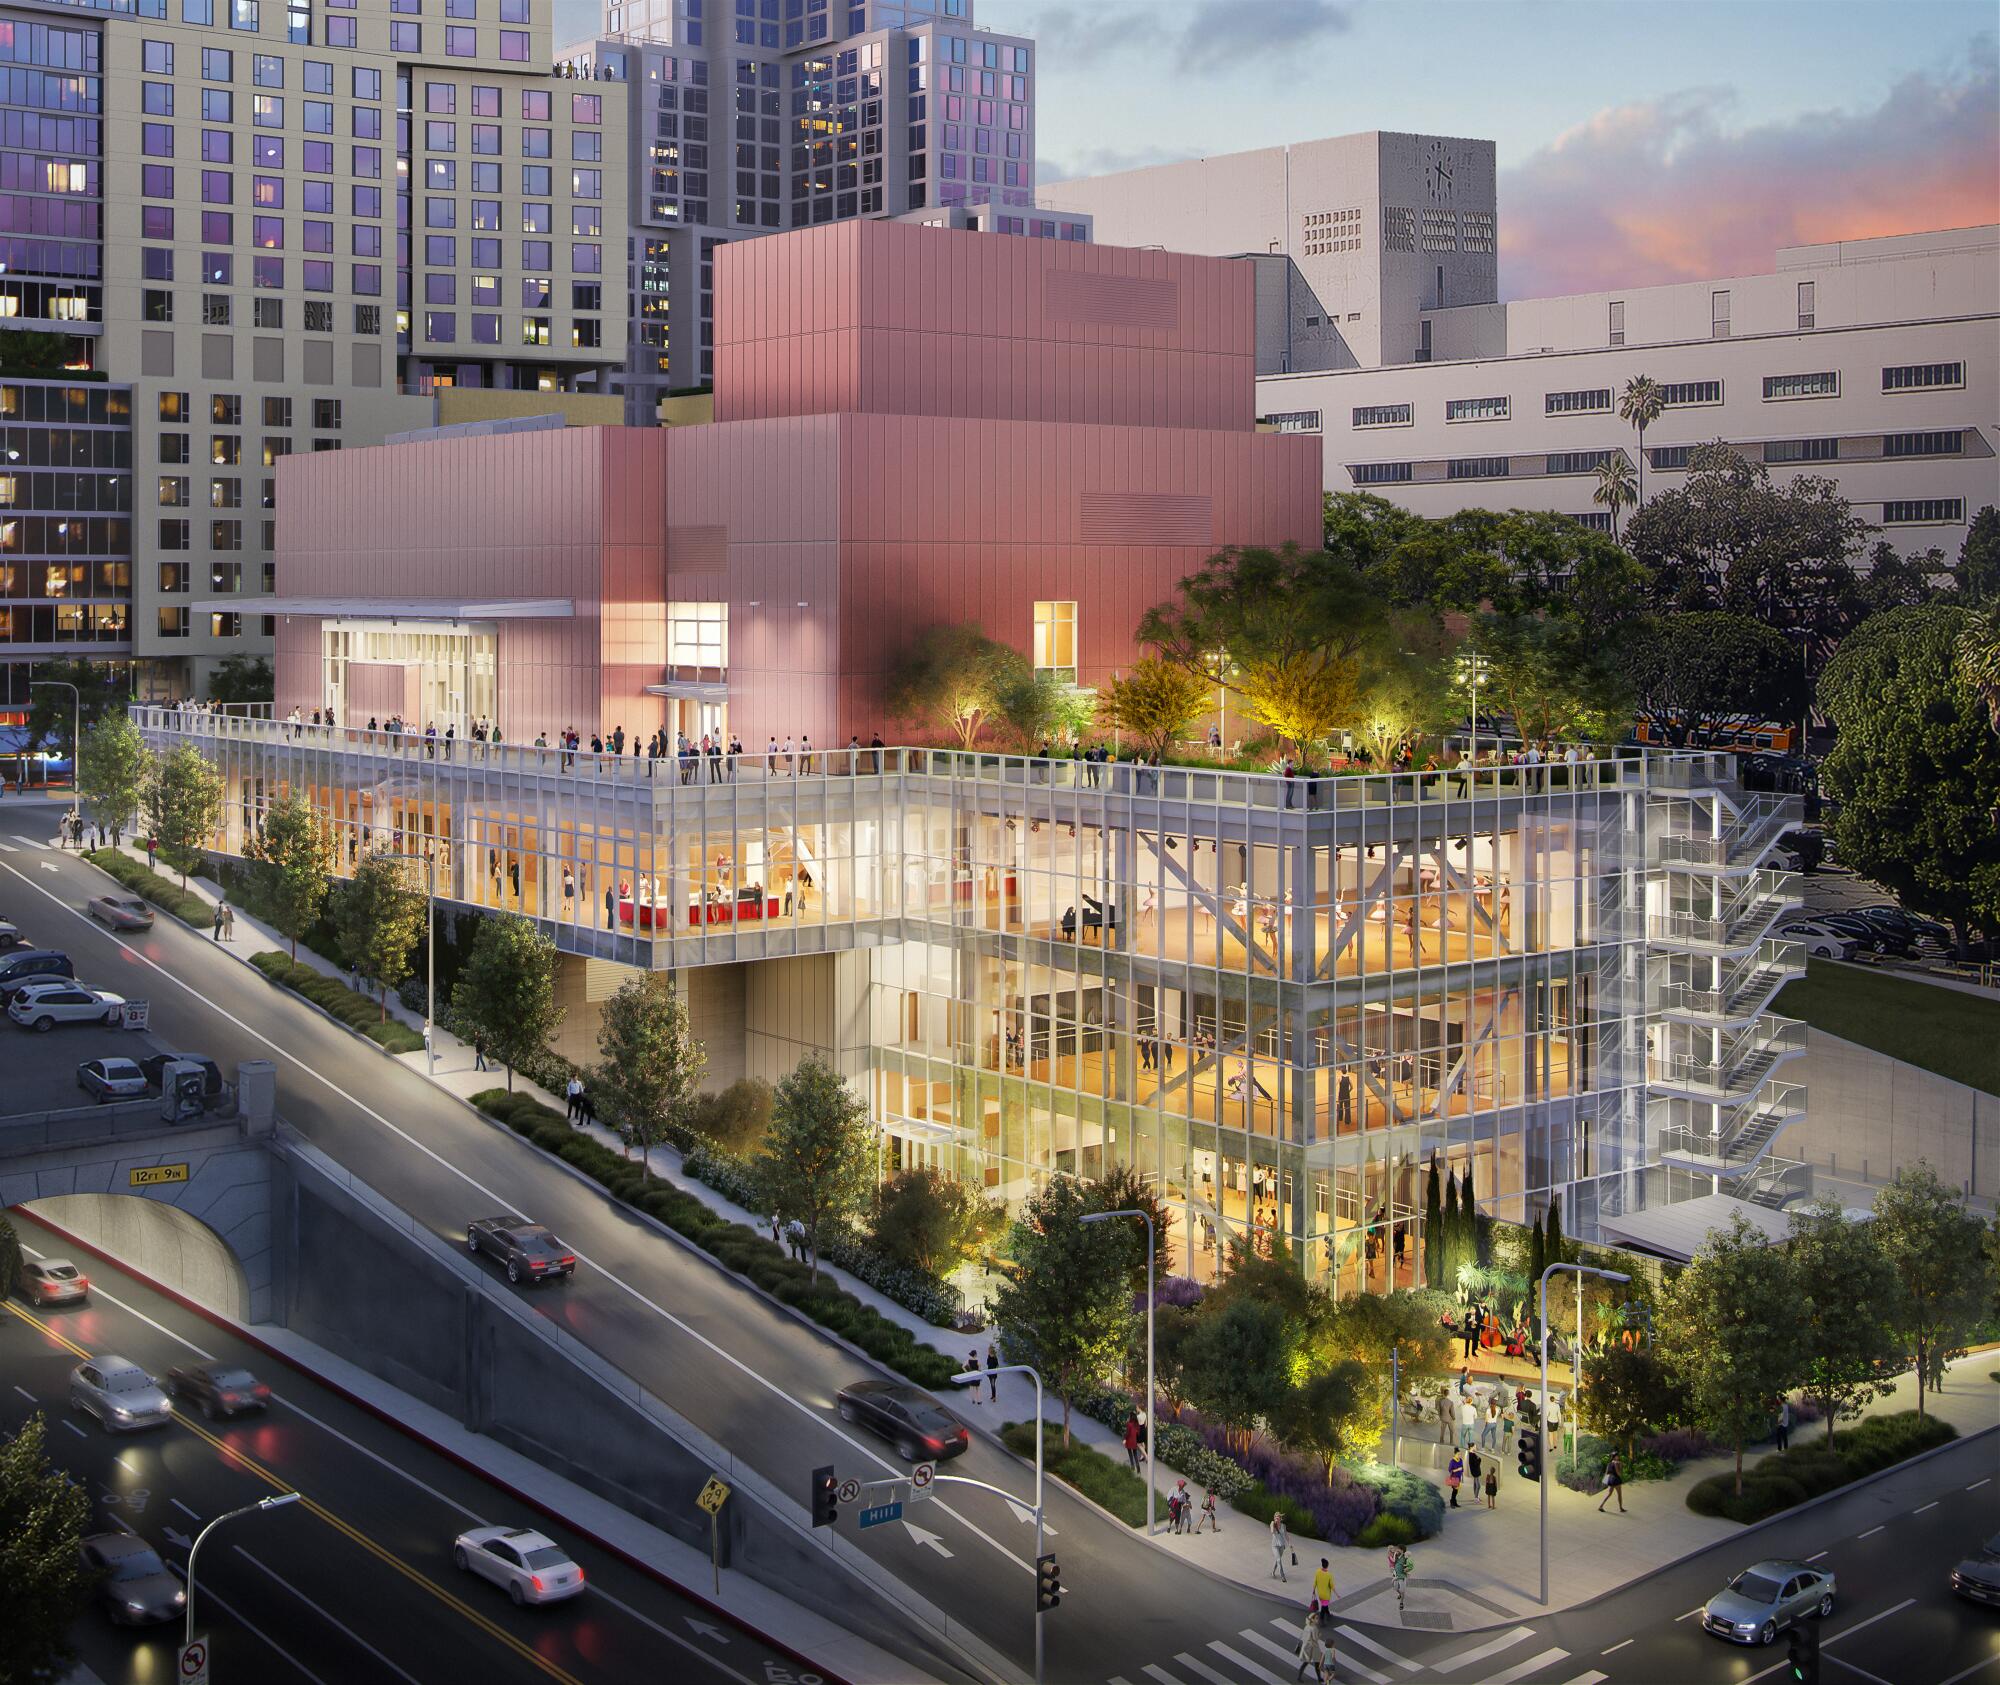 An artist's rendering of the performing arts center at Colburn School